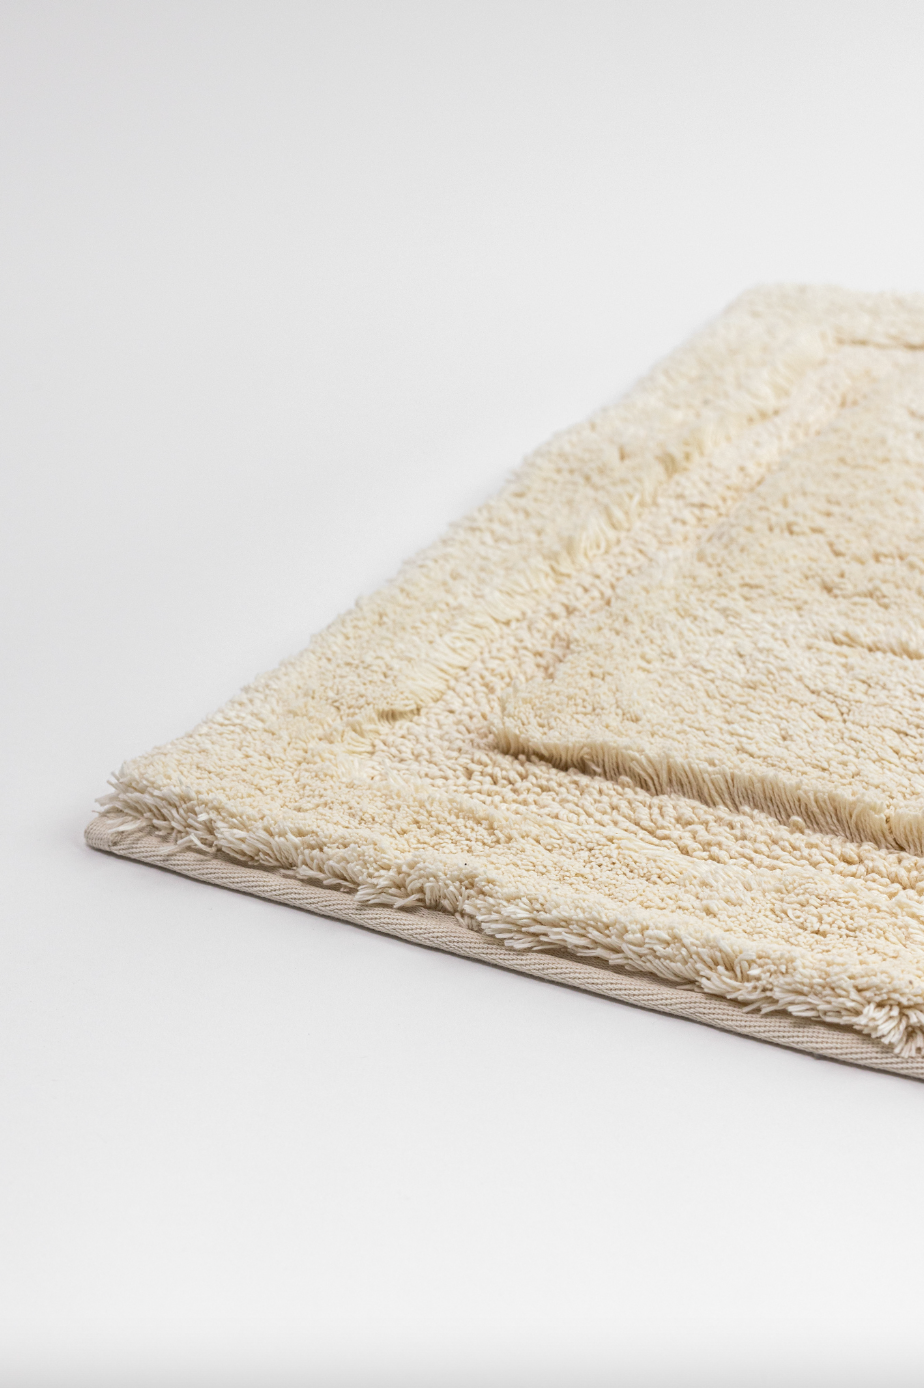 7 Organic Bath Mats for the Sustainable Bathroom — Sustainably Chic